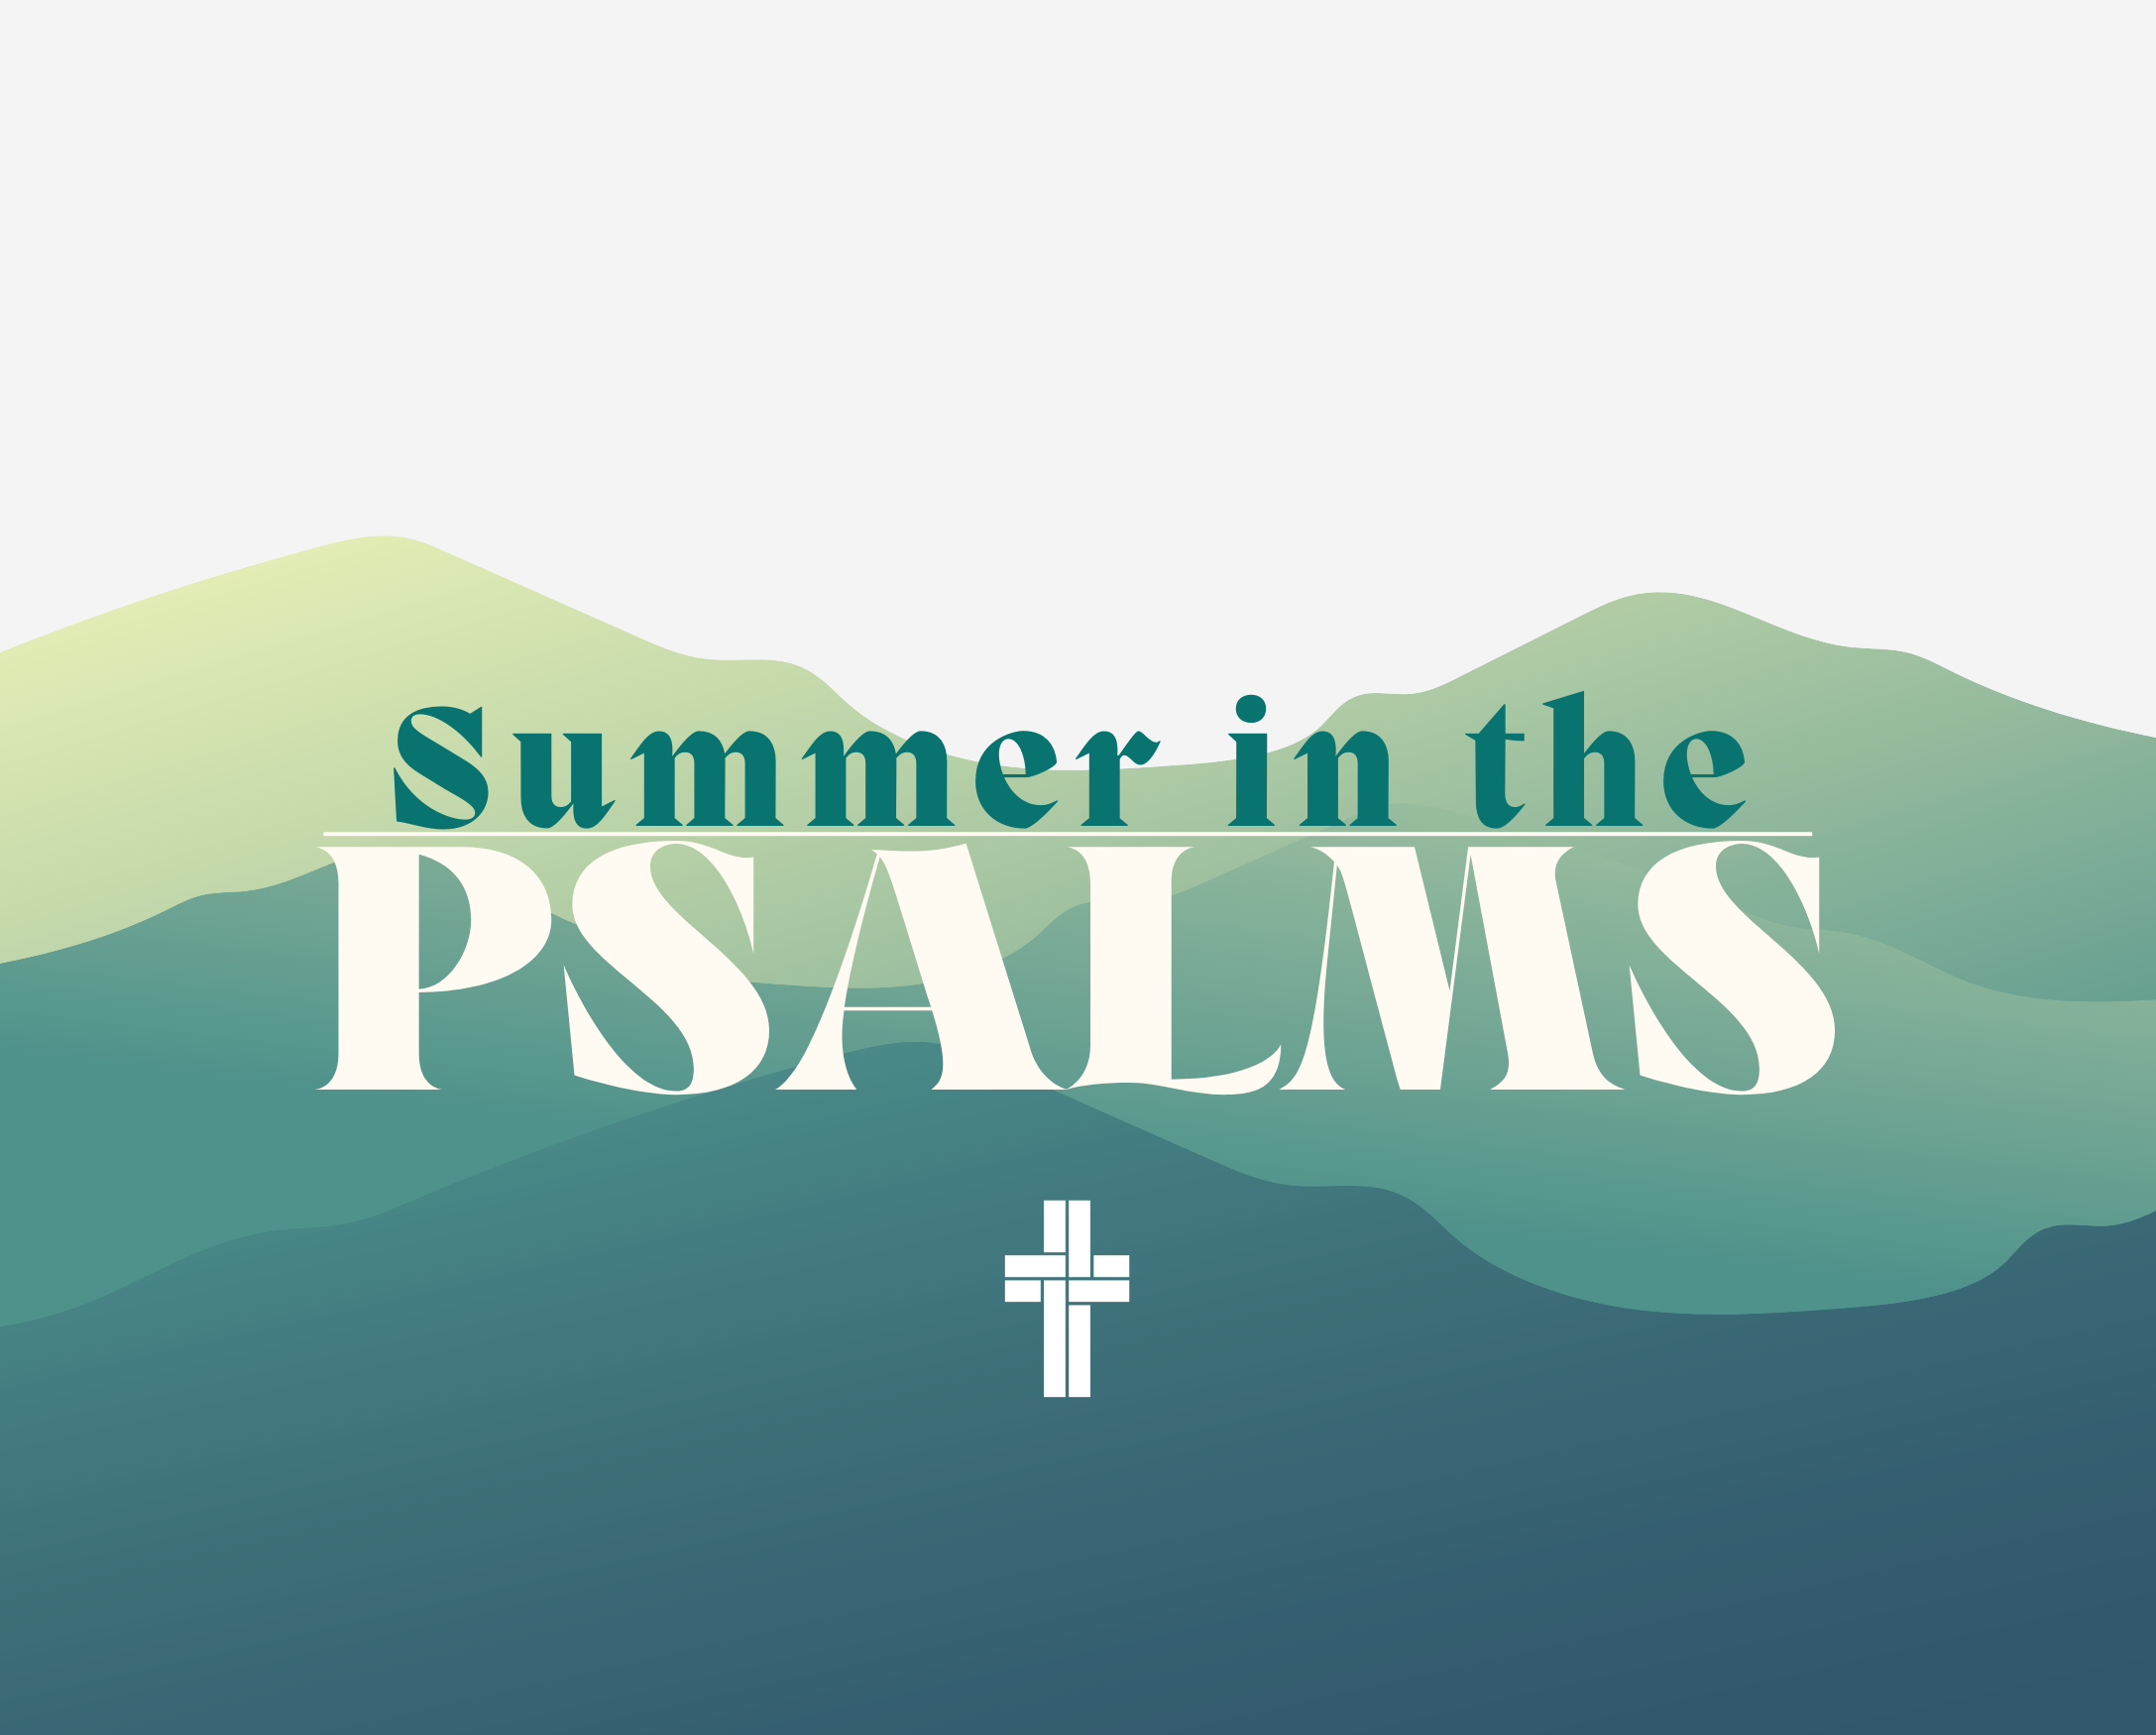 Summer in the Psalms: Forget Not His Benefits